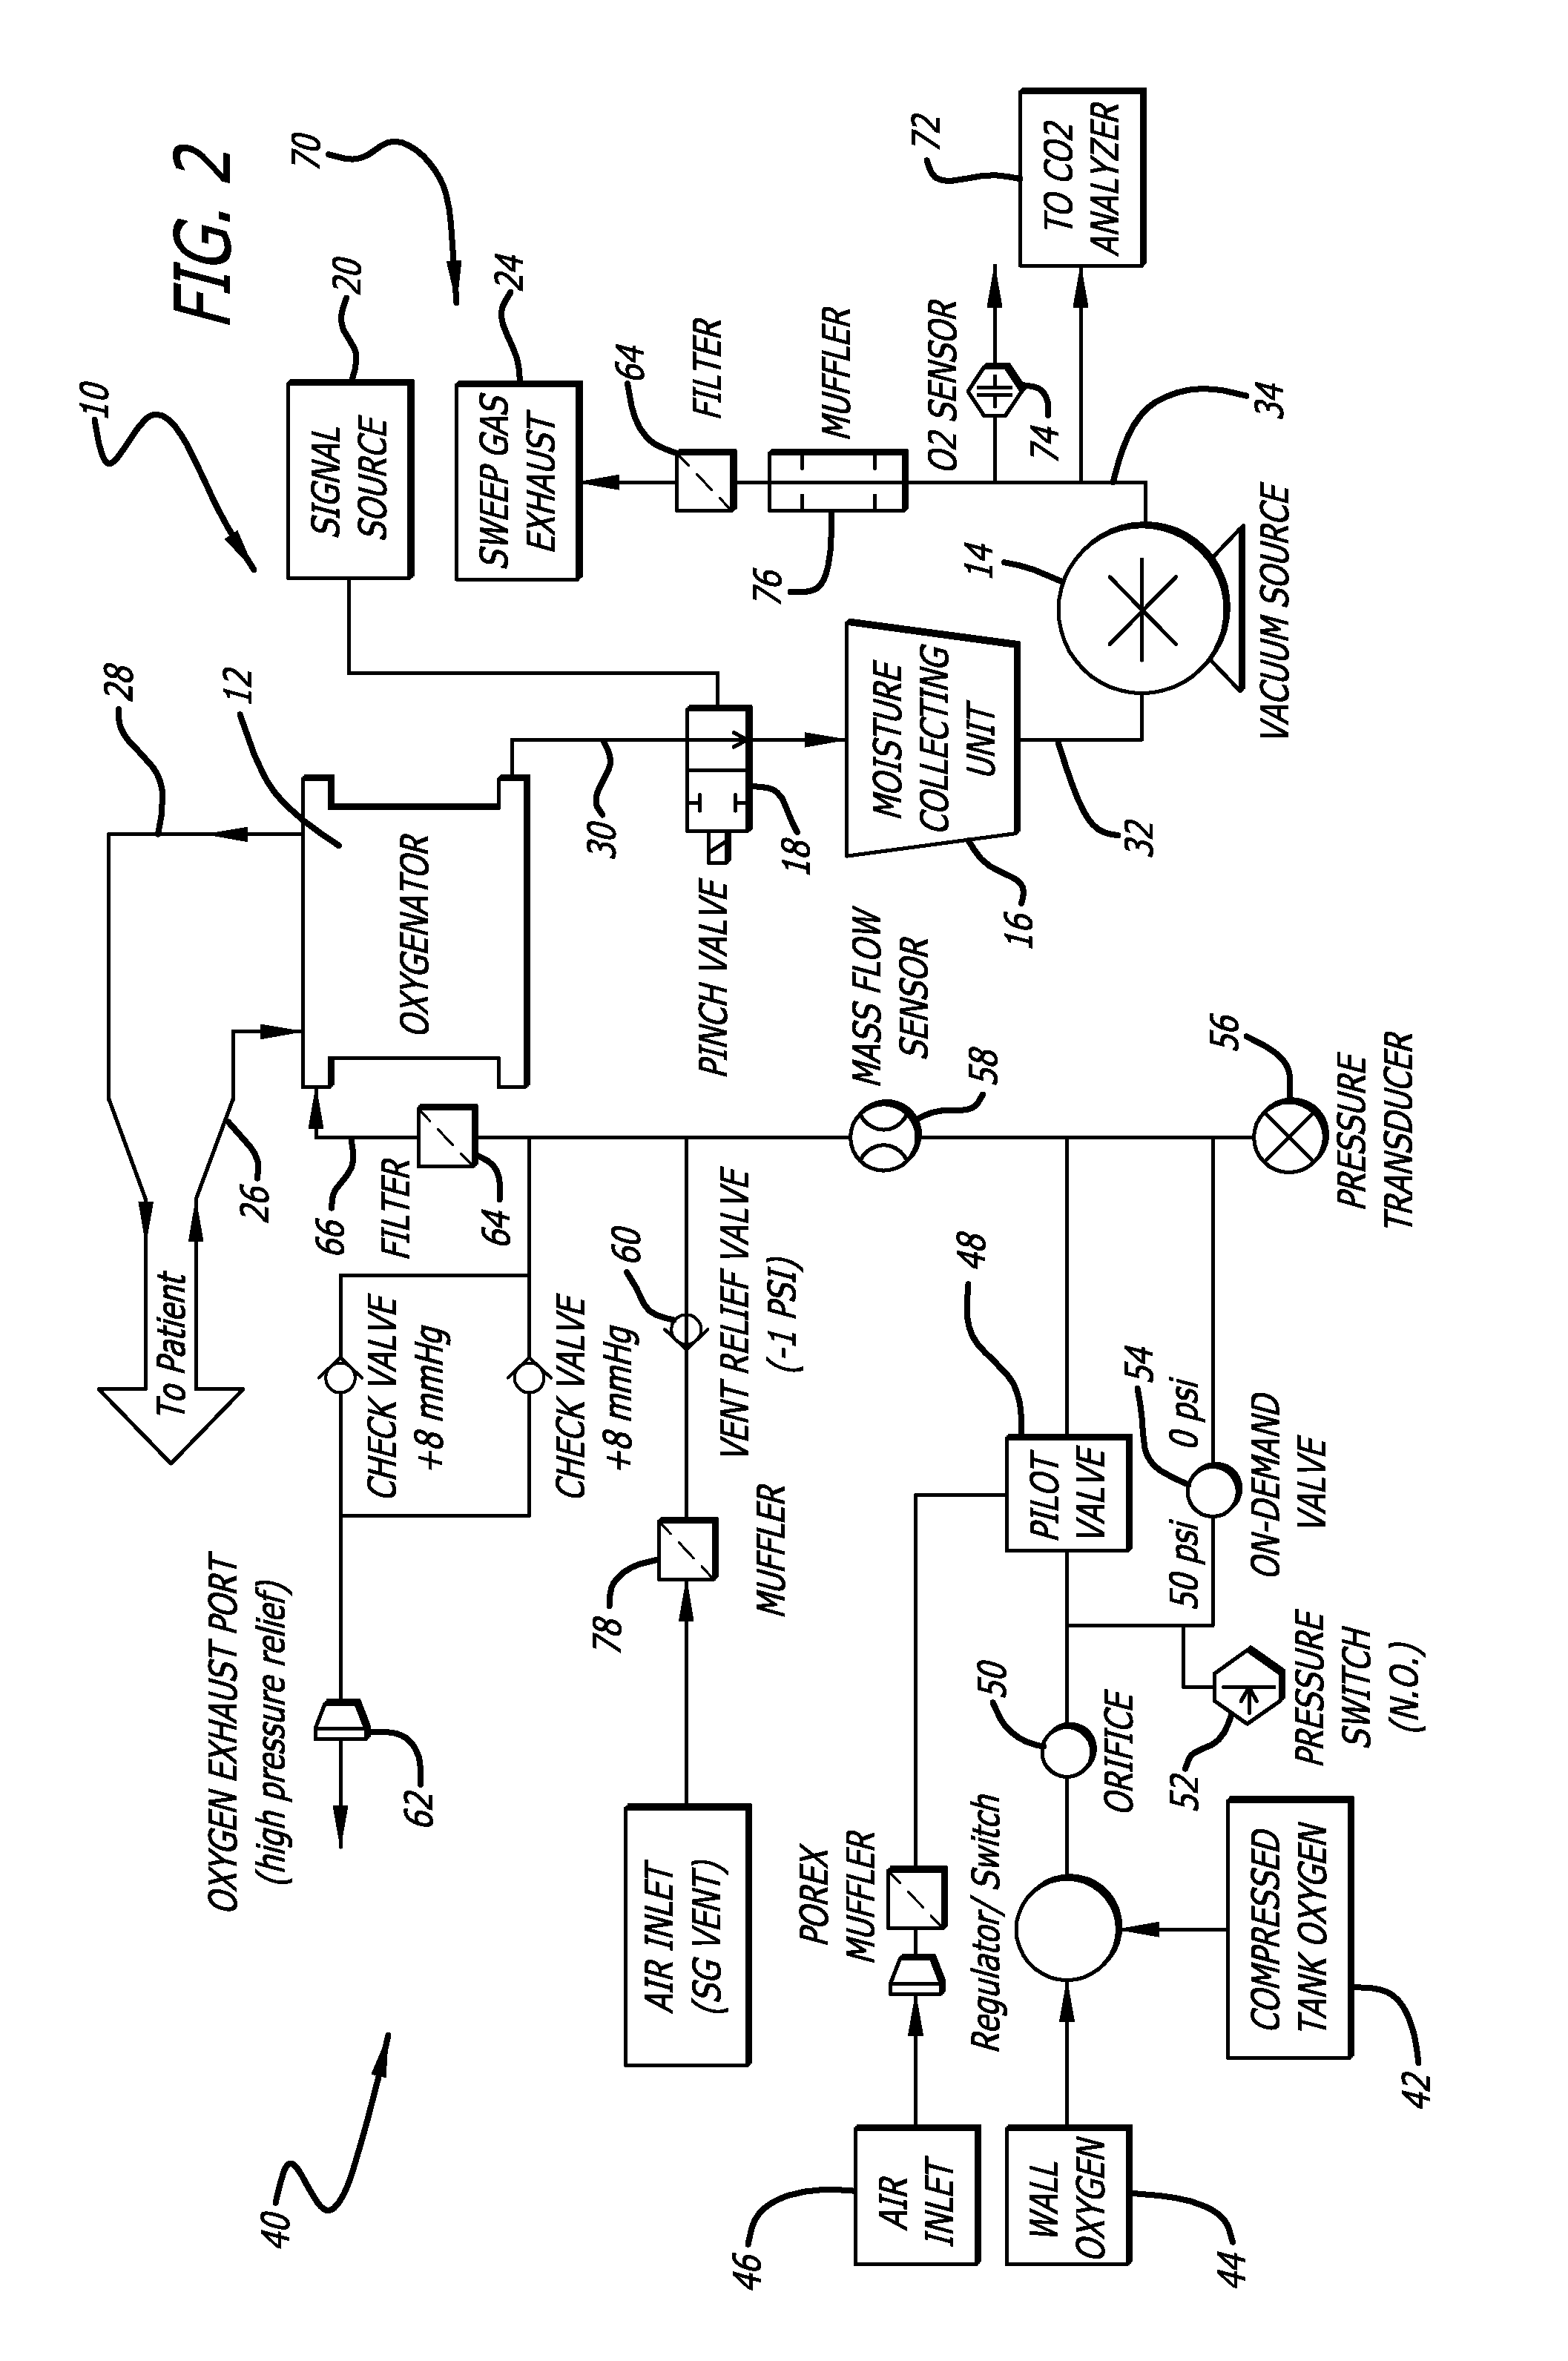 Method and system for purging moisture from an oxygenator